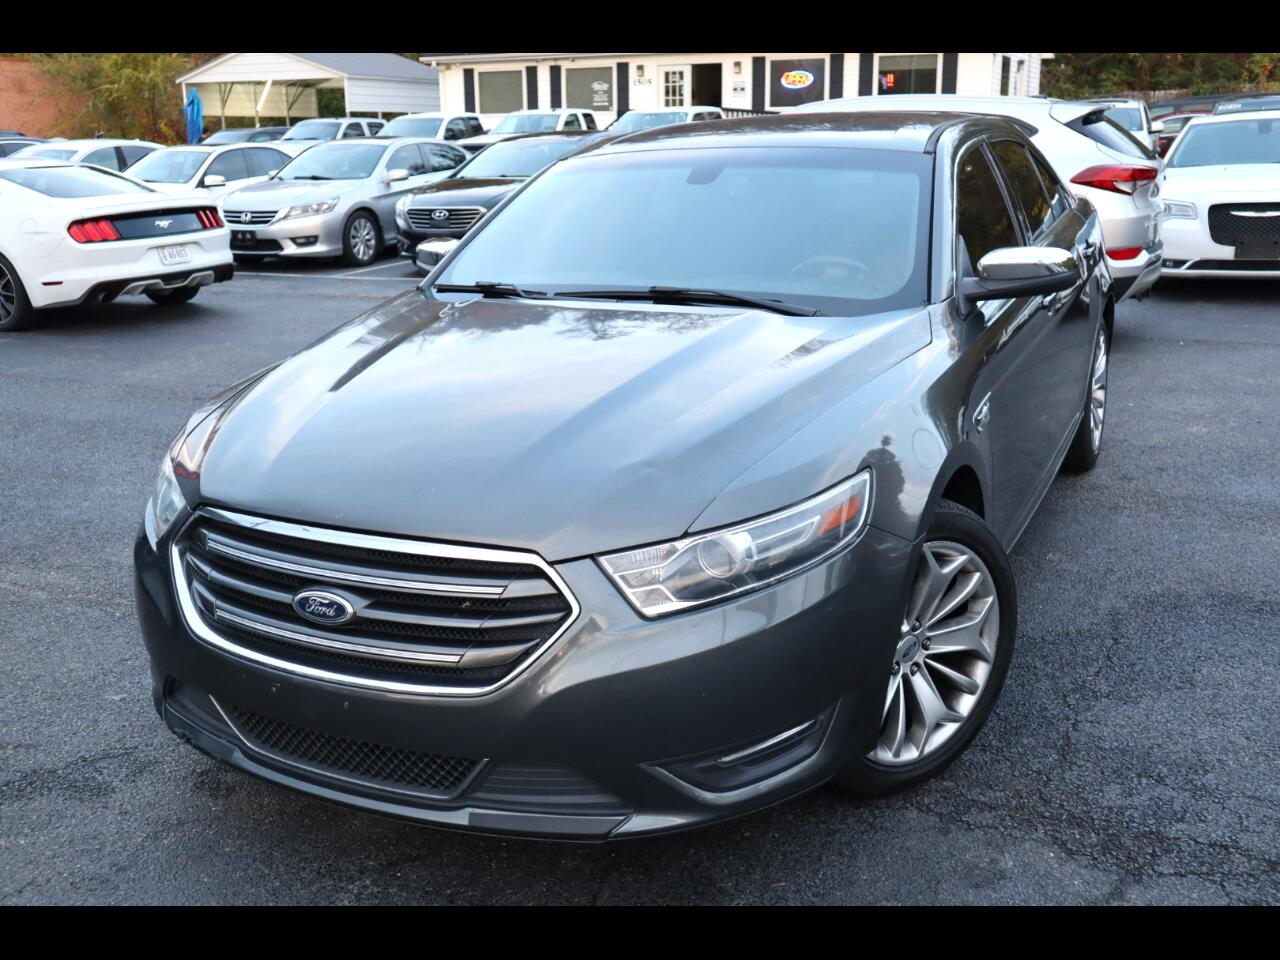 Ford Taurus 4dr Sdn Limited FWD 2015